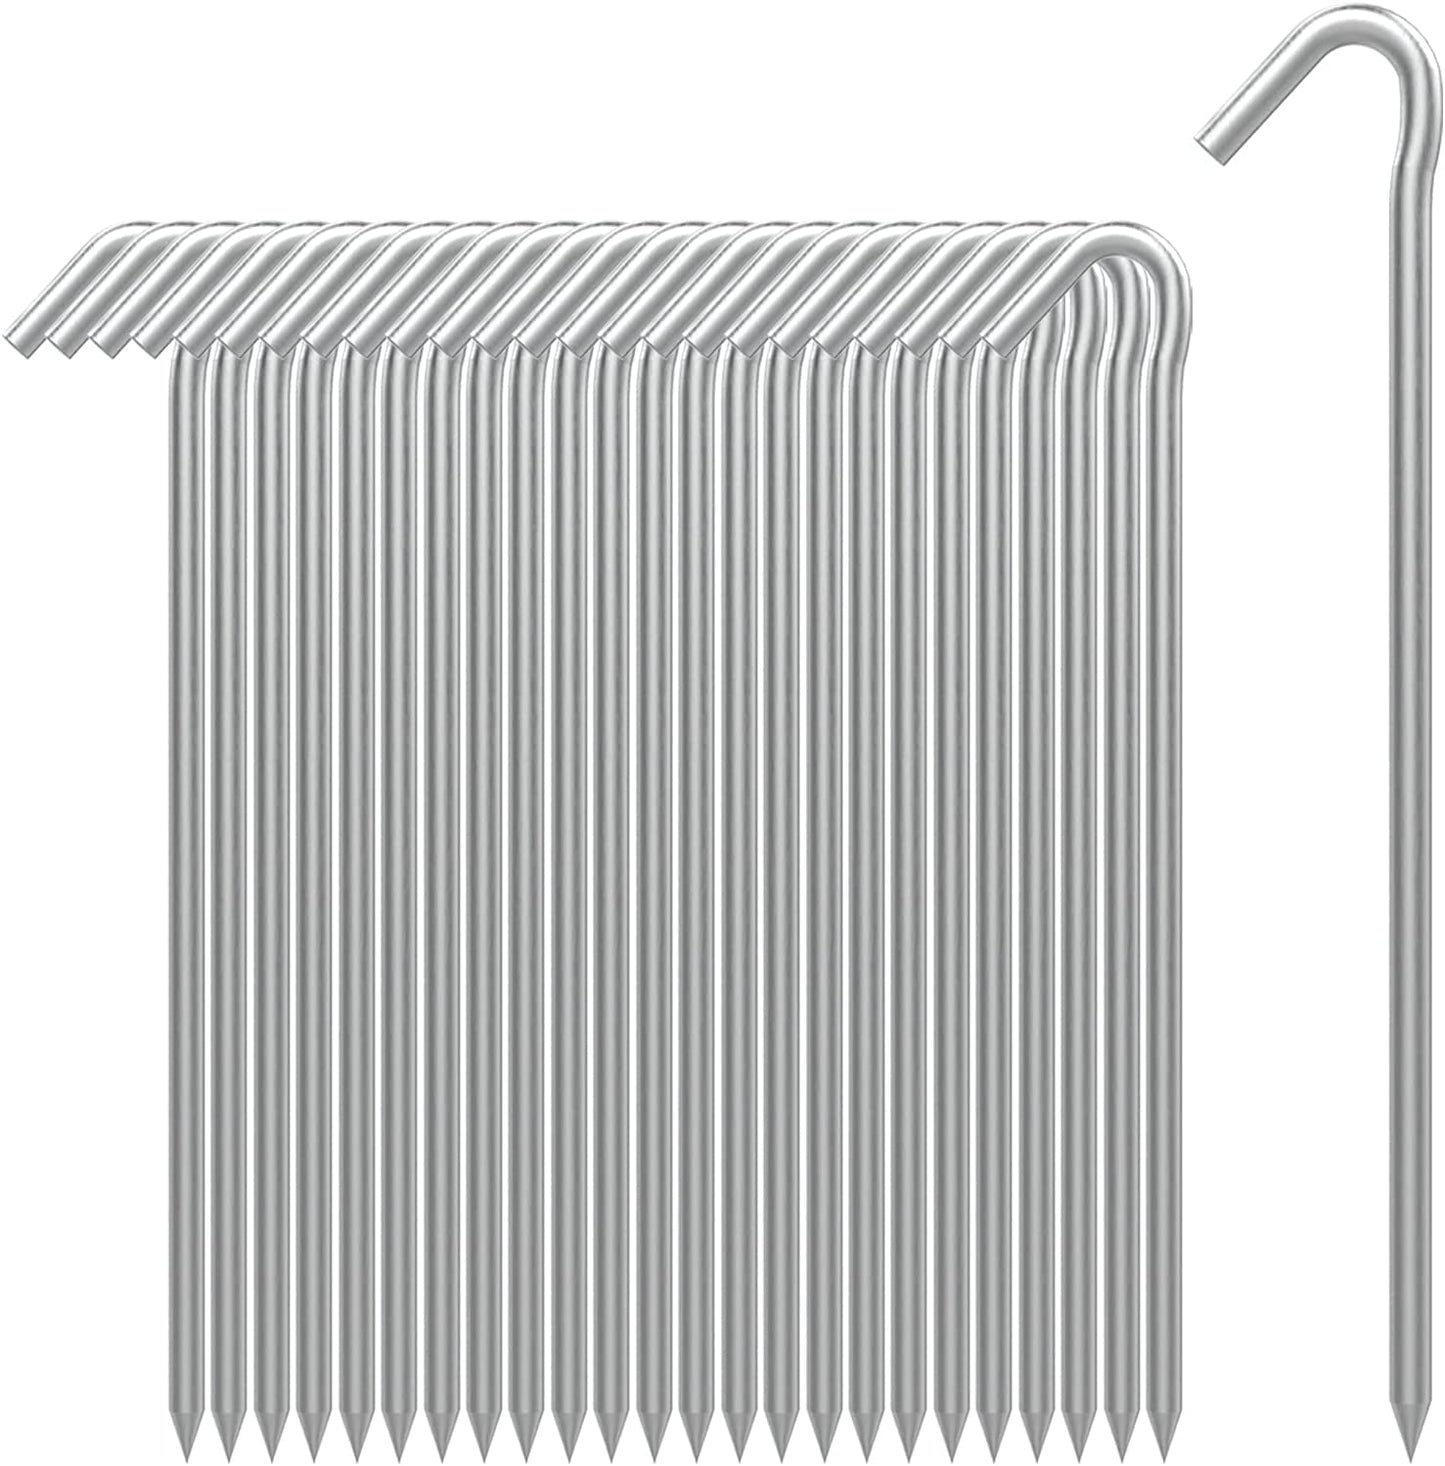 Tent Stakes 9 inch (20 Pcs)